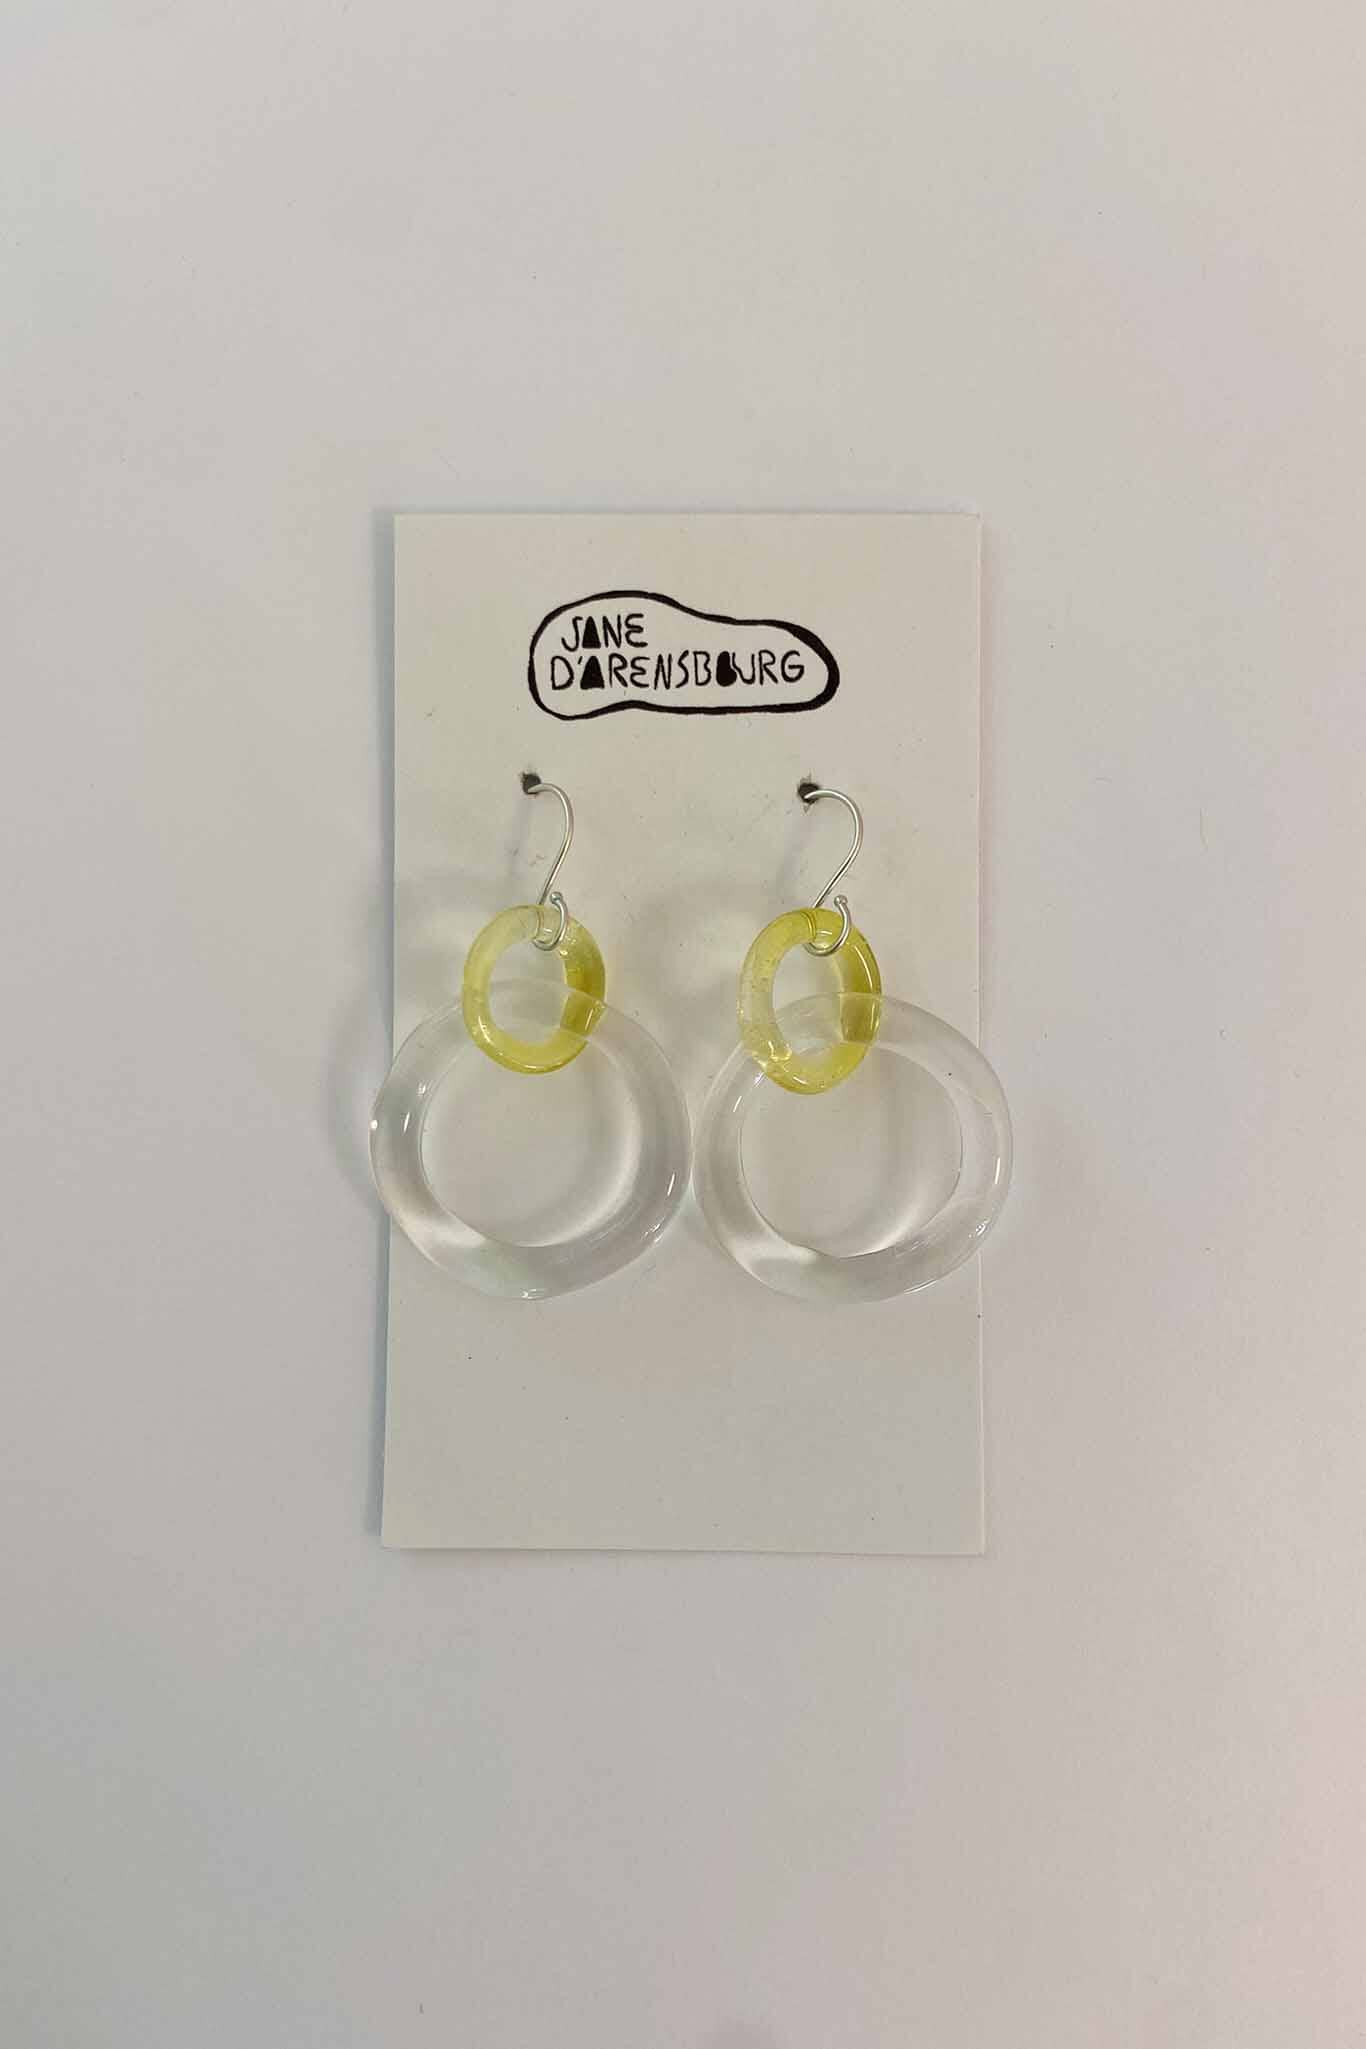 Jane D'Arensbourg Hoops - Yellow